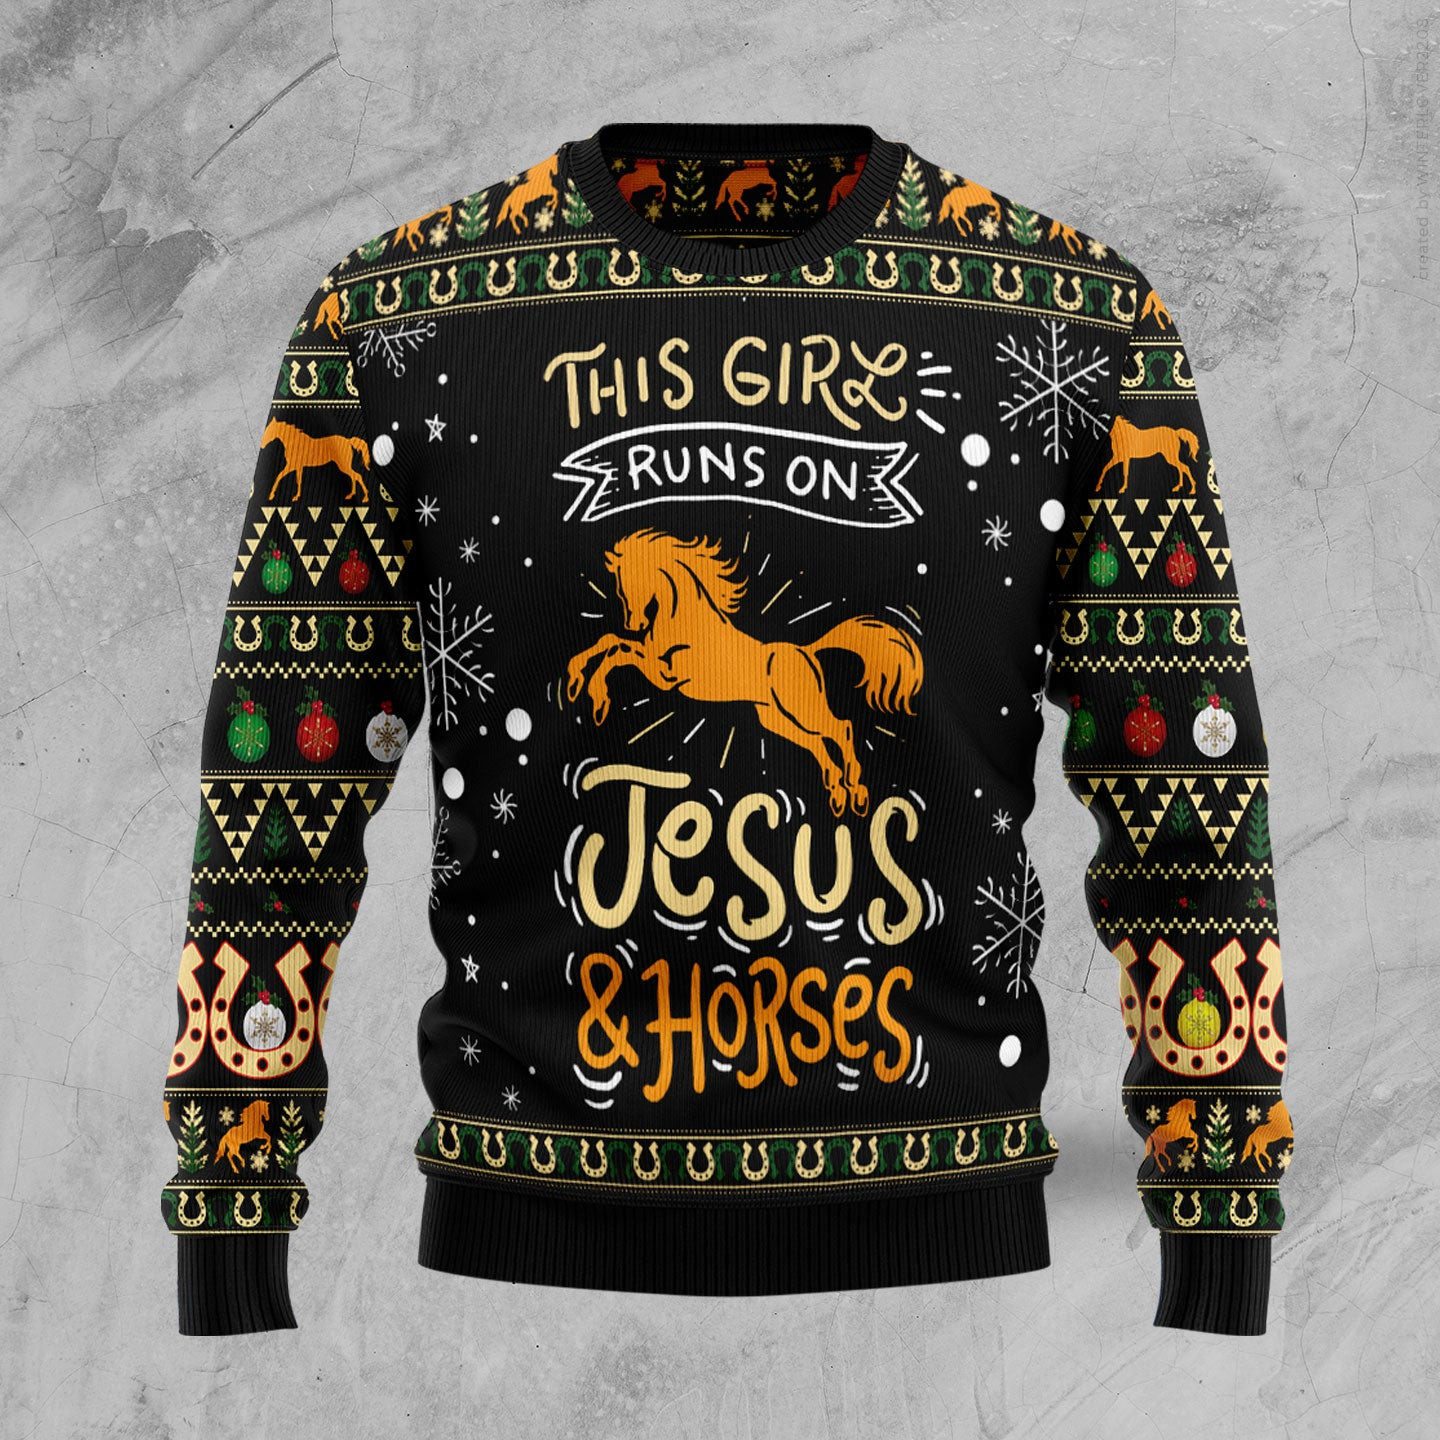 Girls run on jesus and horses Ugly Christmas Sweater, Ugly Sweater For Men Women, Holiday Sweater